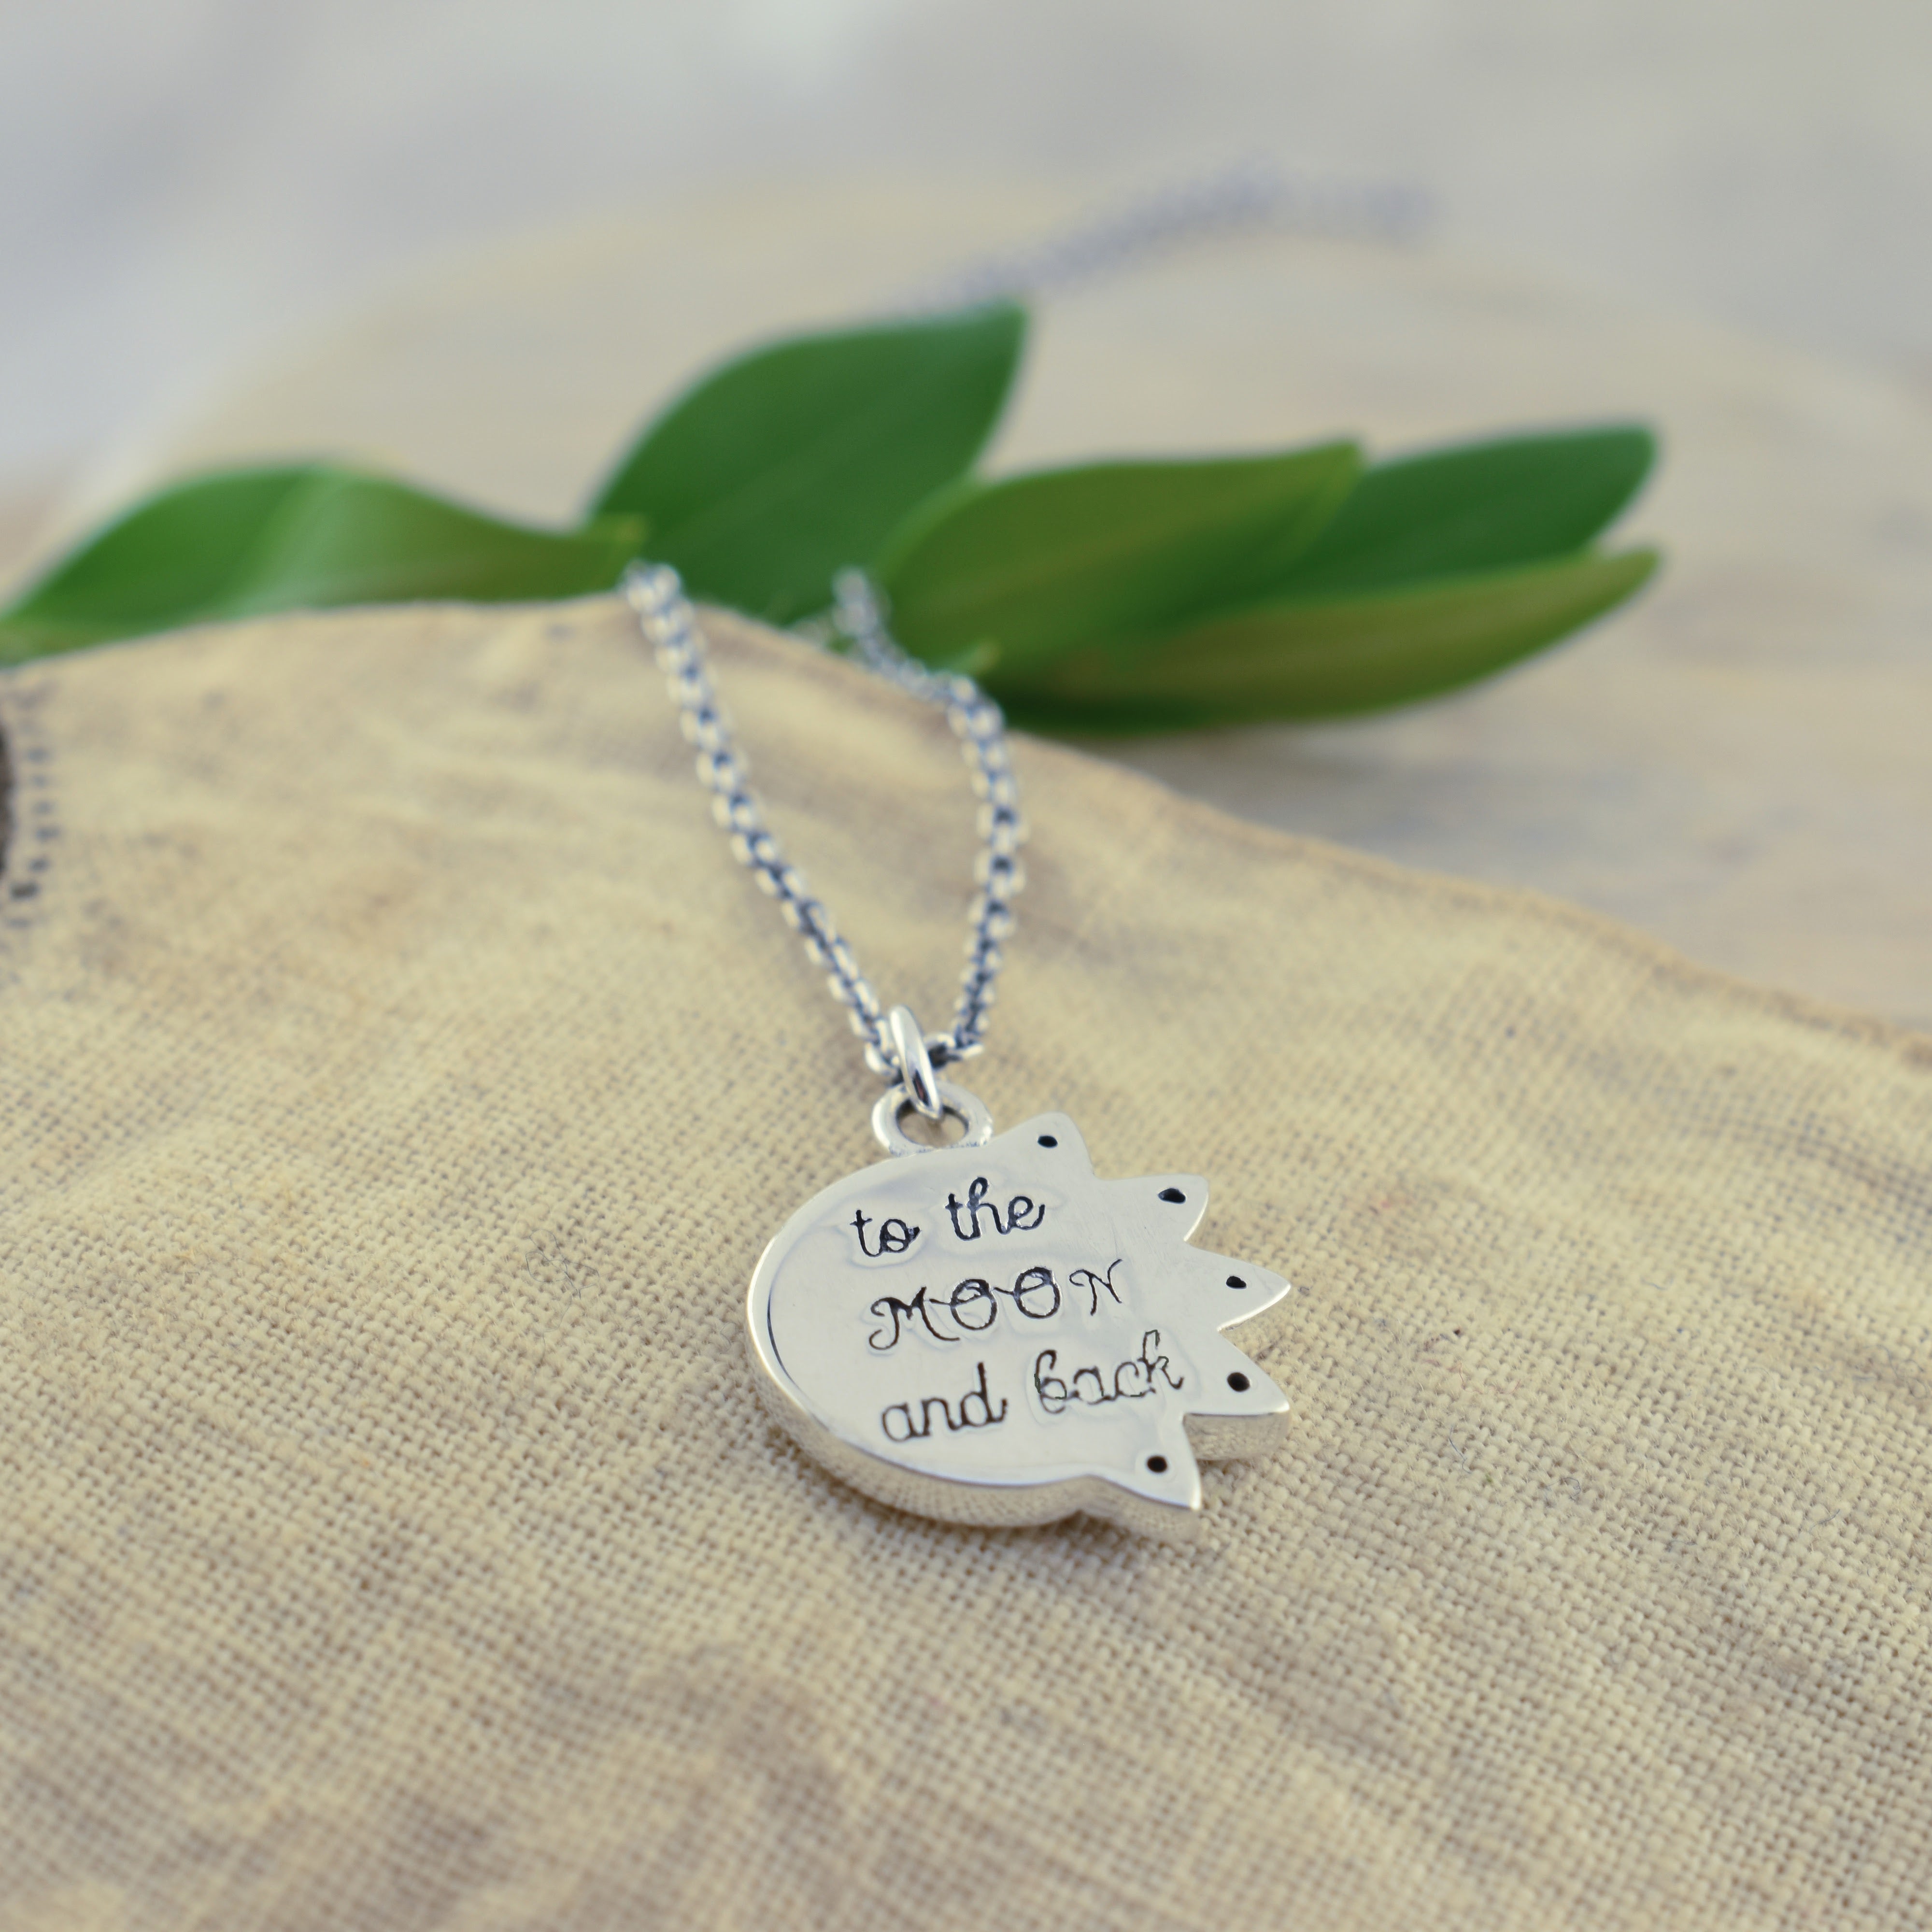 sun and moon necklace with "to the moon and back" inscribed on the back